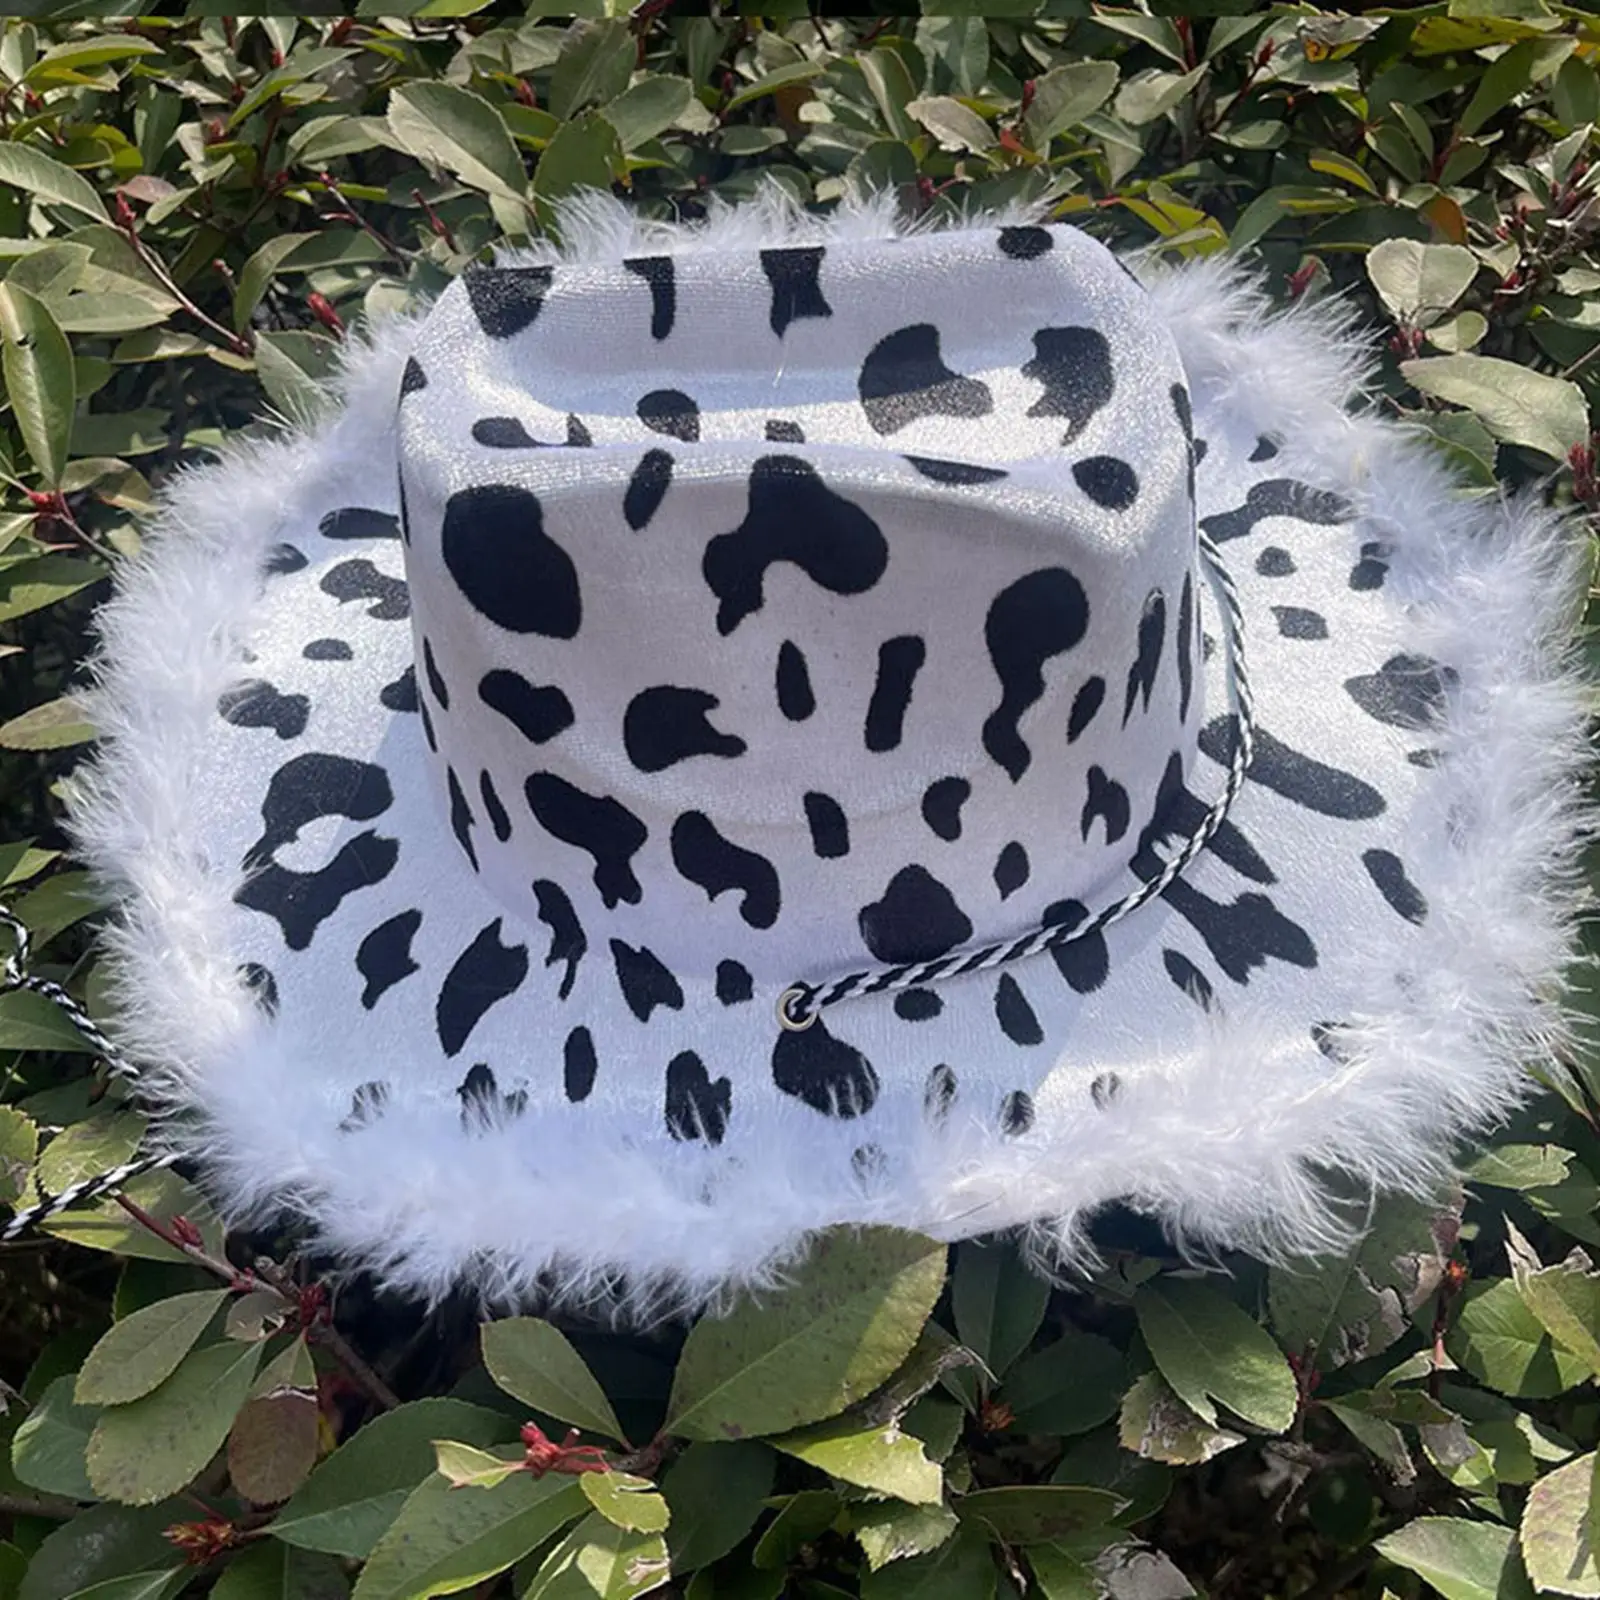 Western Cowboy Hat Sun Hats with Lanyard Dress up Breathable Big Brim Cow Hat for Unisex Adults Men Women Party Holiday Outdoor